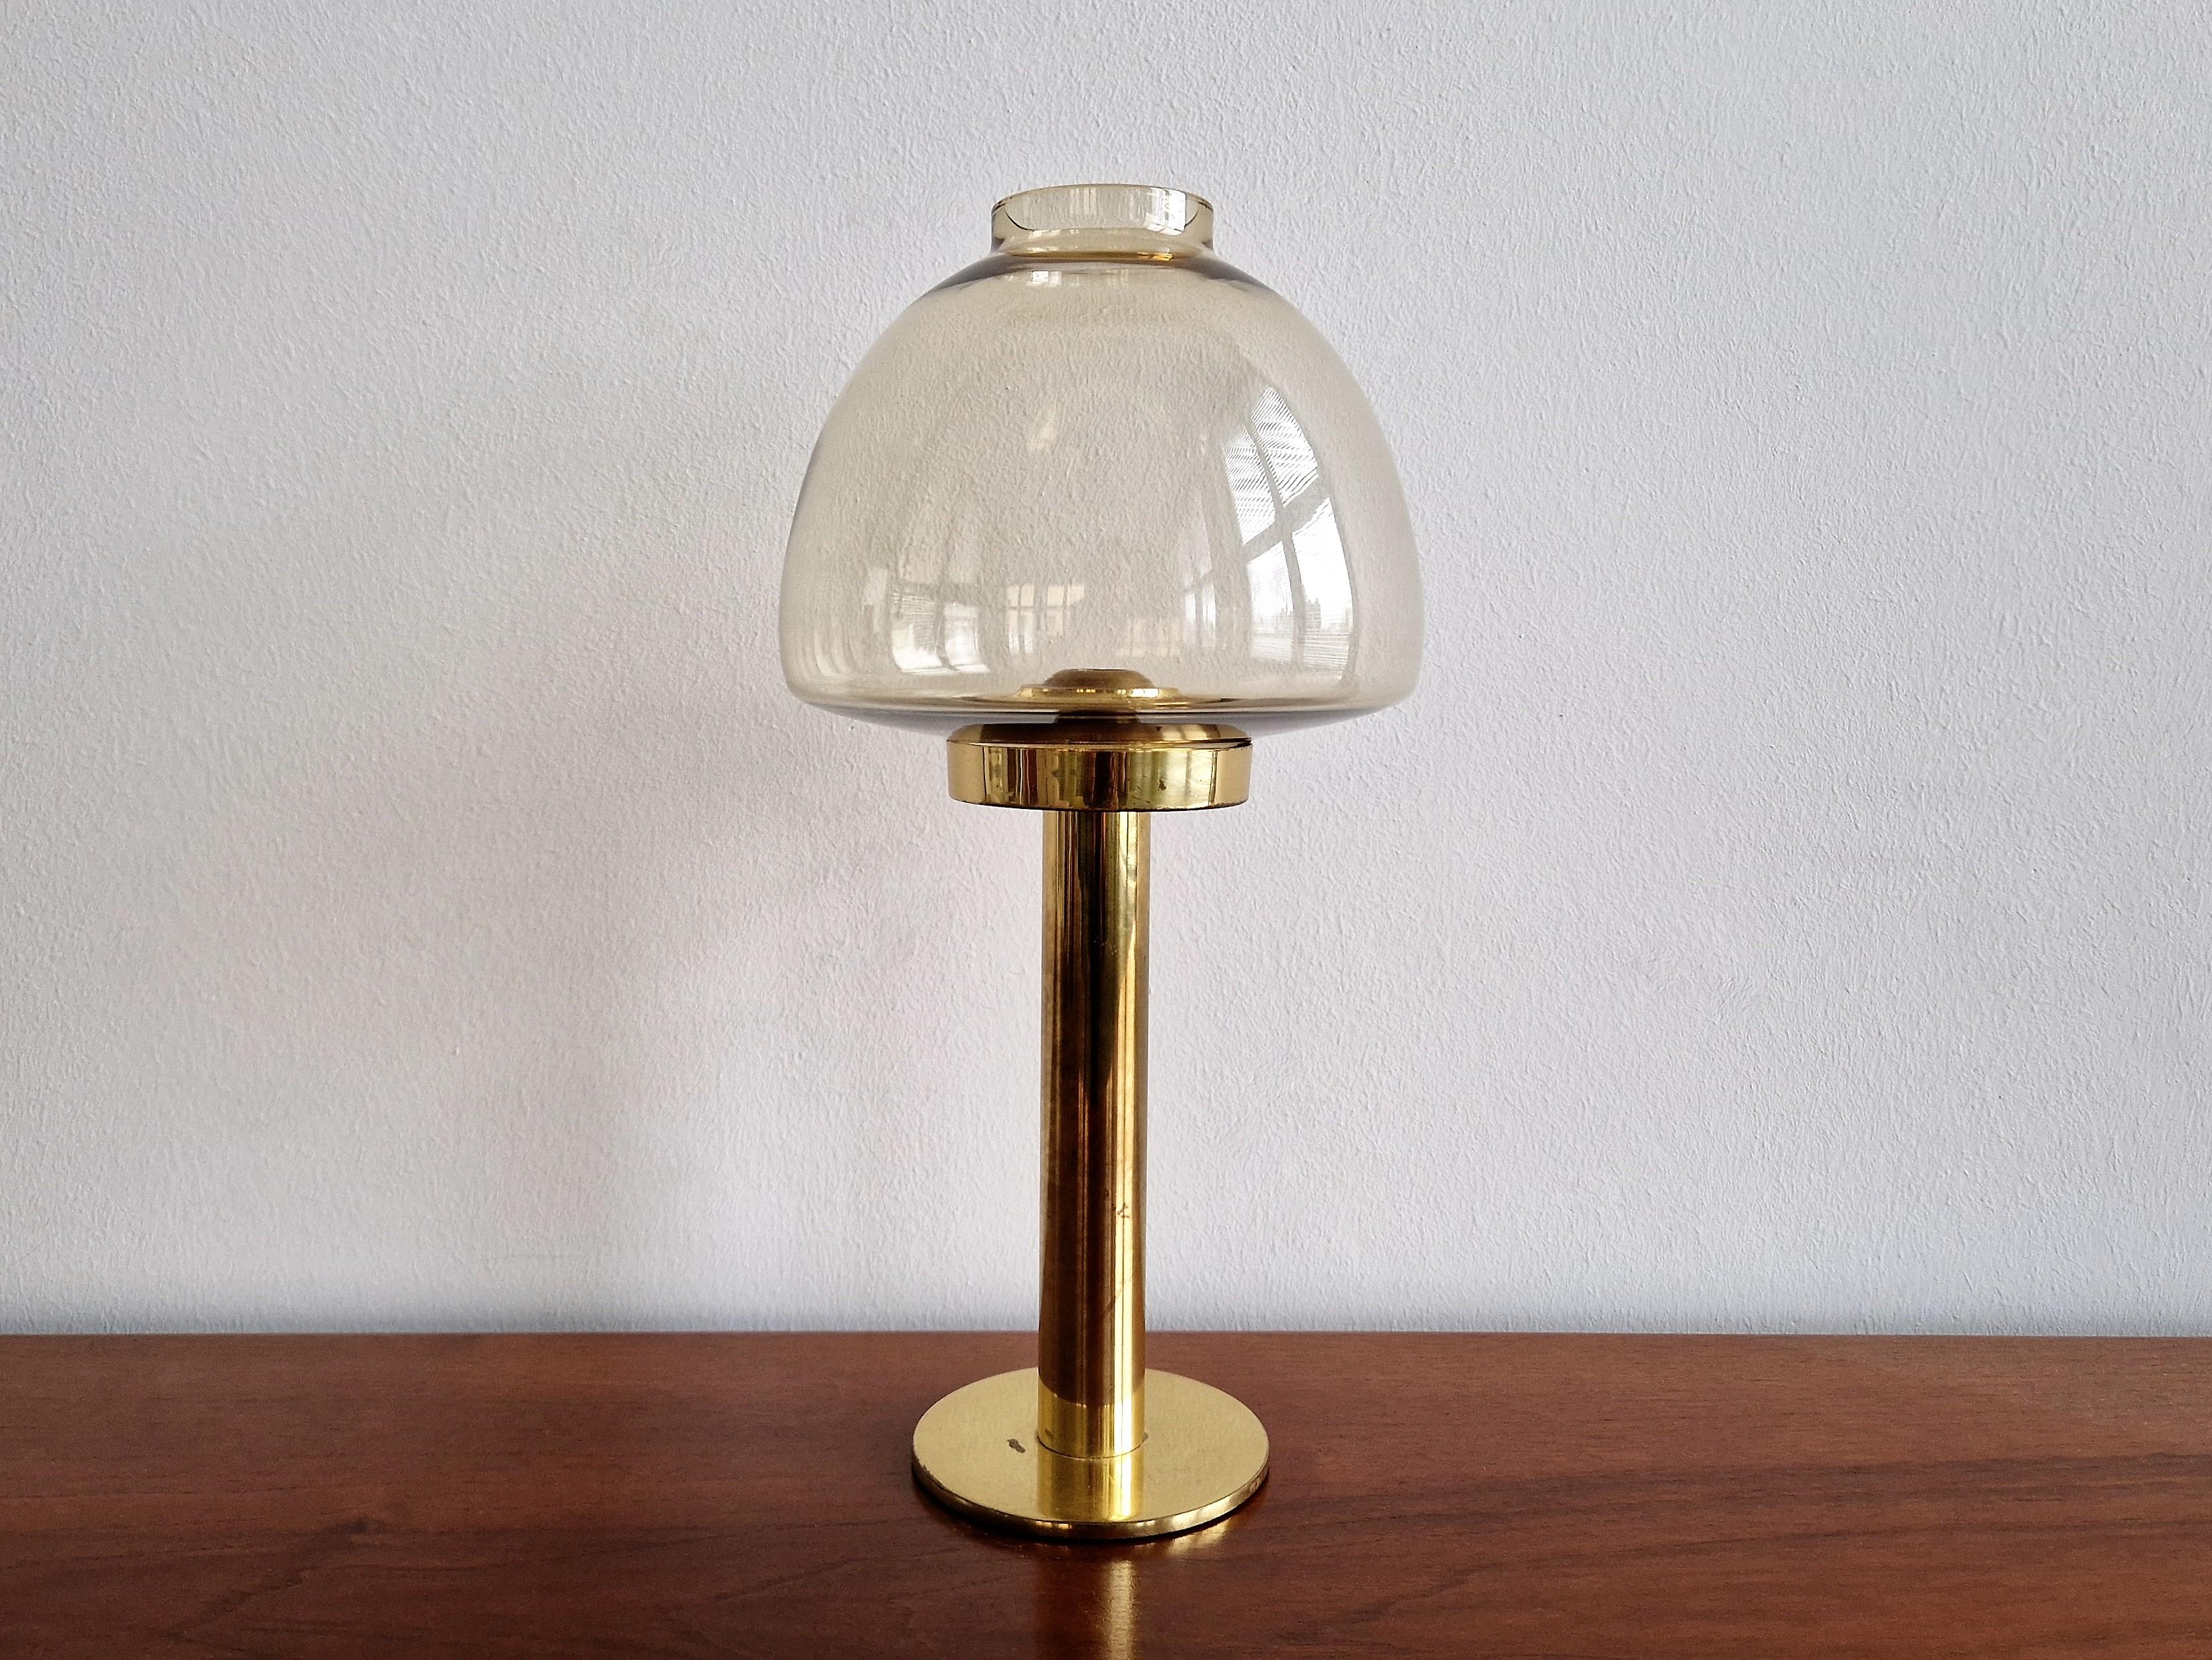 This beautiful and decorative candleholder, model L102/32, was designed by Hans Agne Jakobsson for Markaryd. It has a mouth-blown glass shade and a brass base. All in a good condition with smaller signs of age and use.